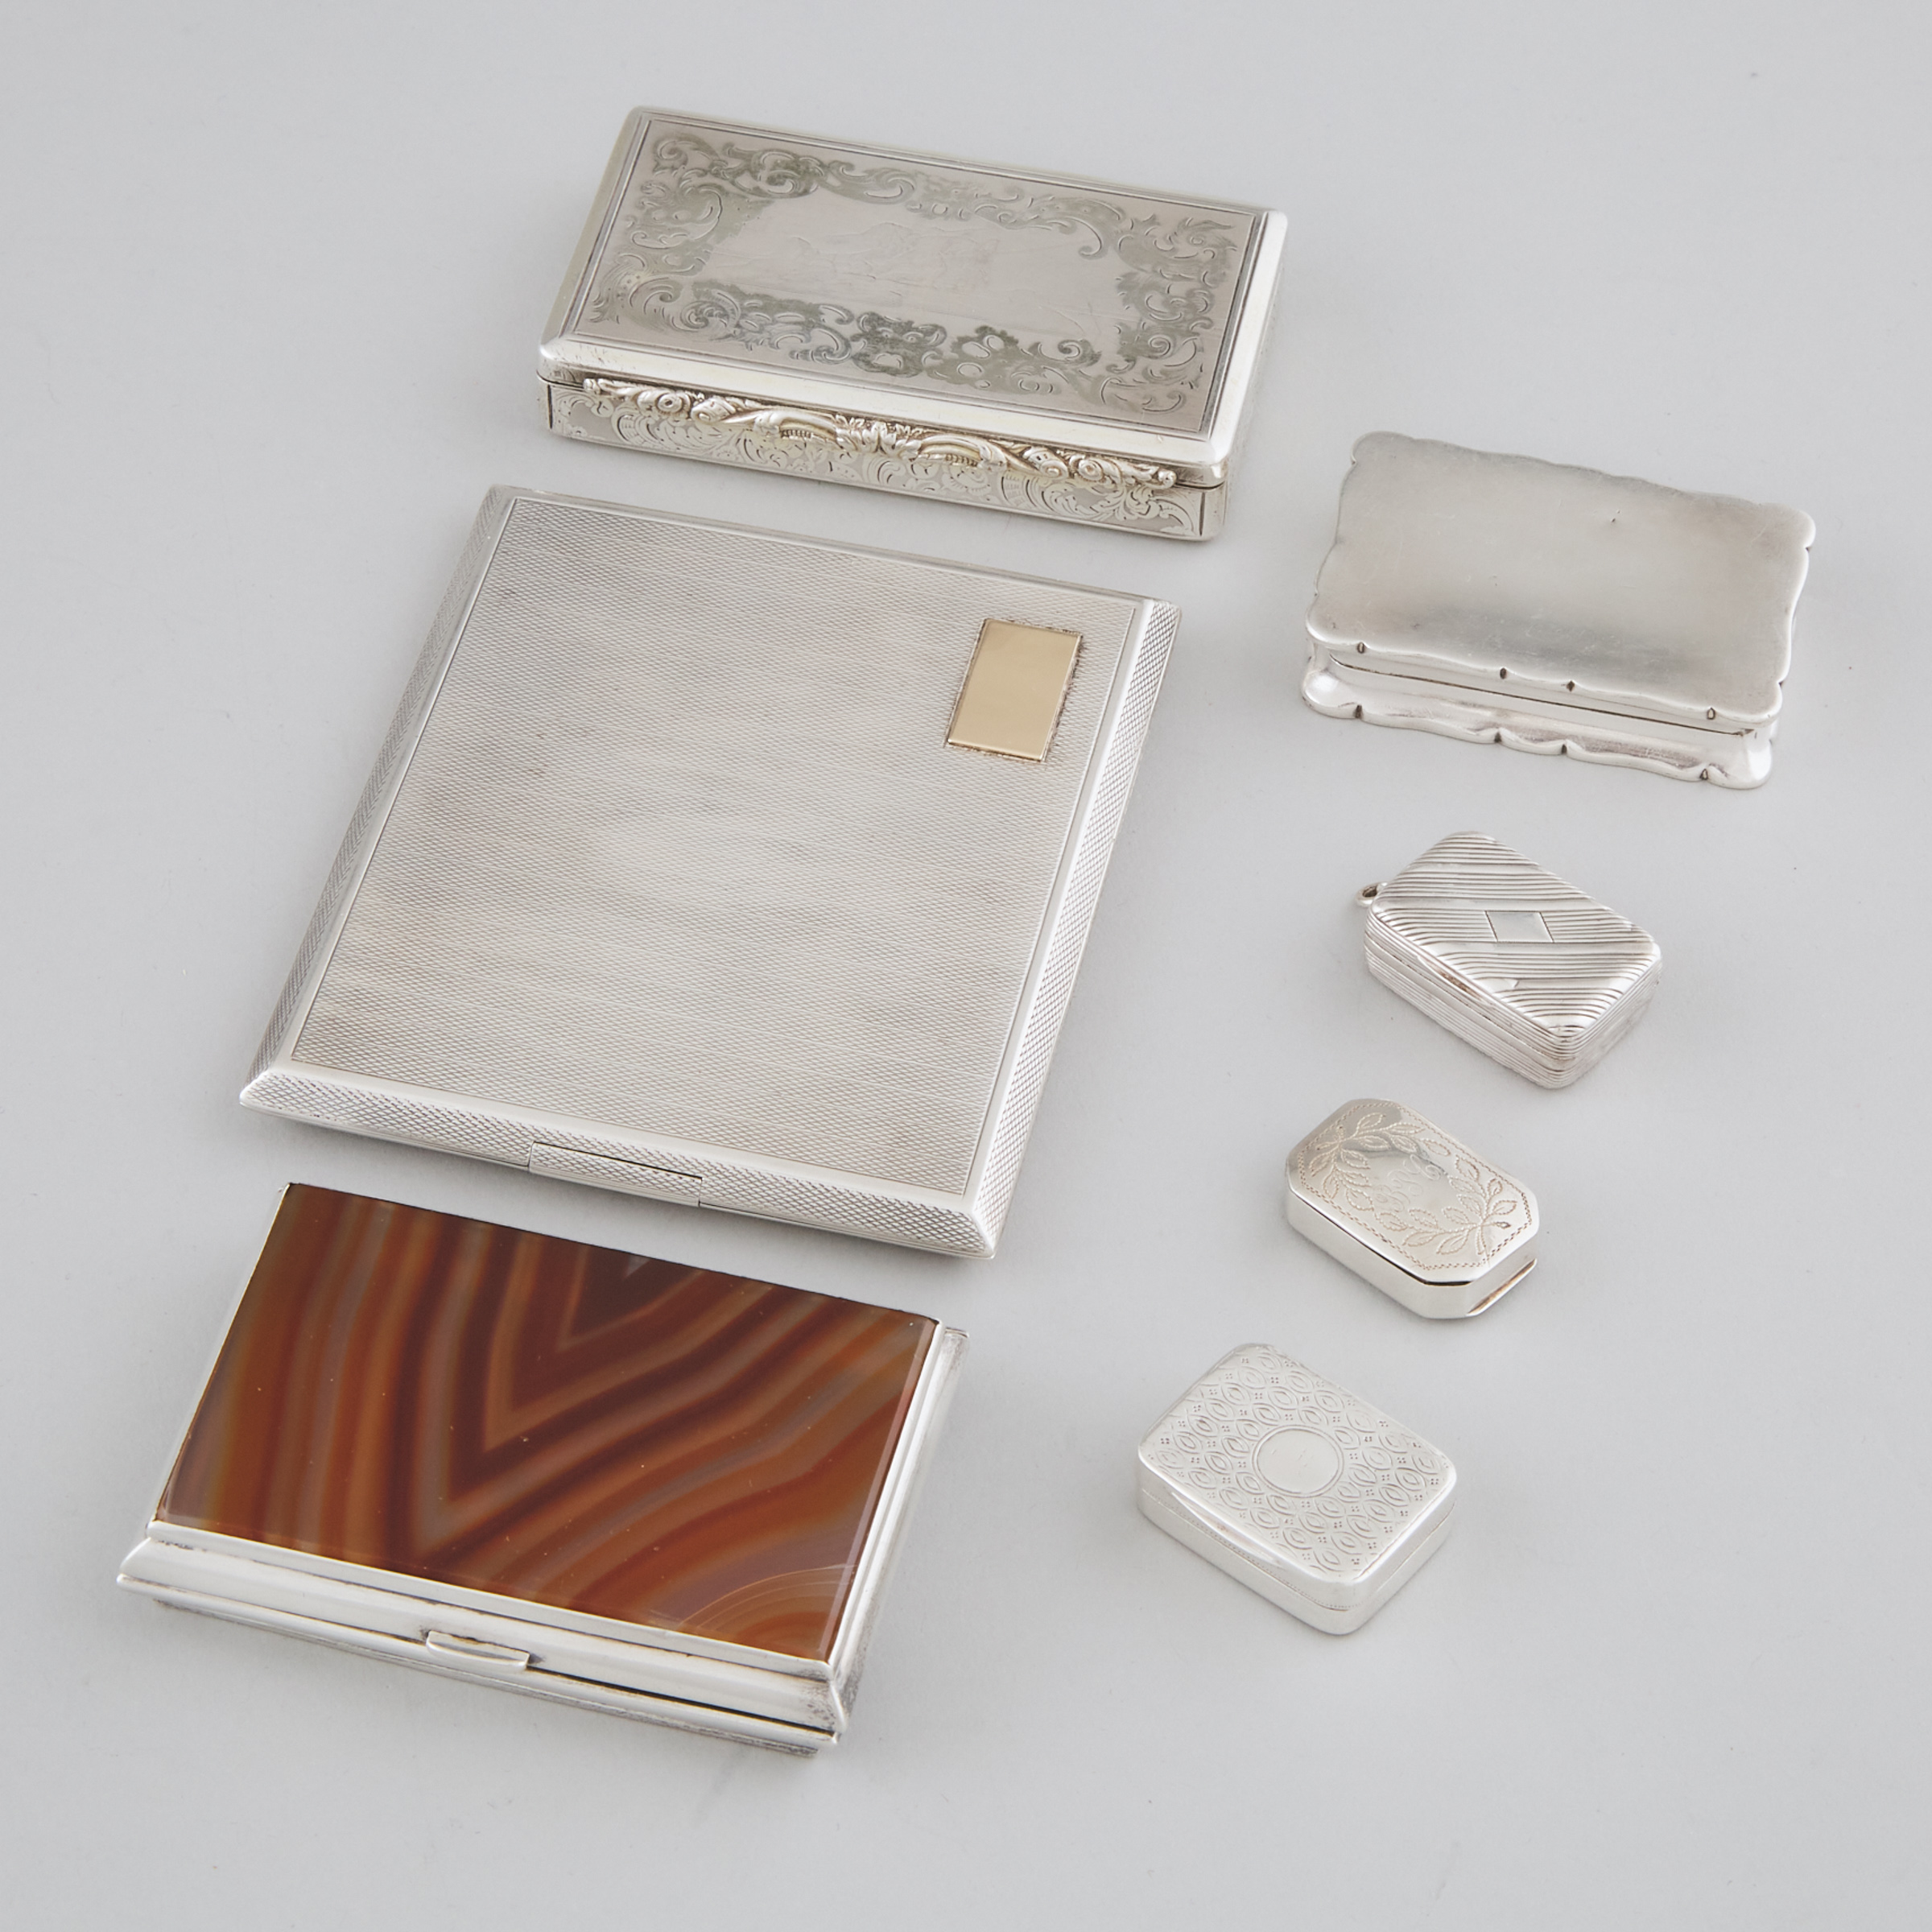 Group of Seven Various English and Continental Silver Boxes, 19th/20th century